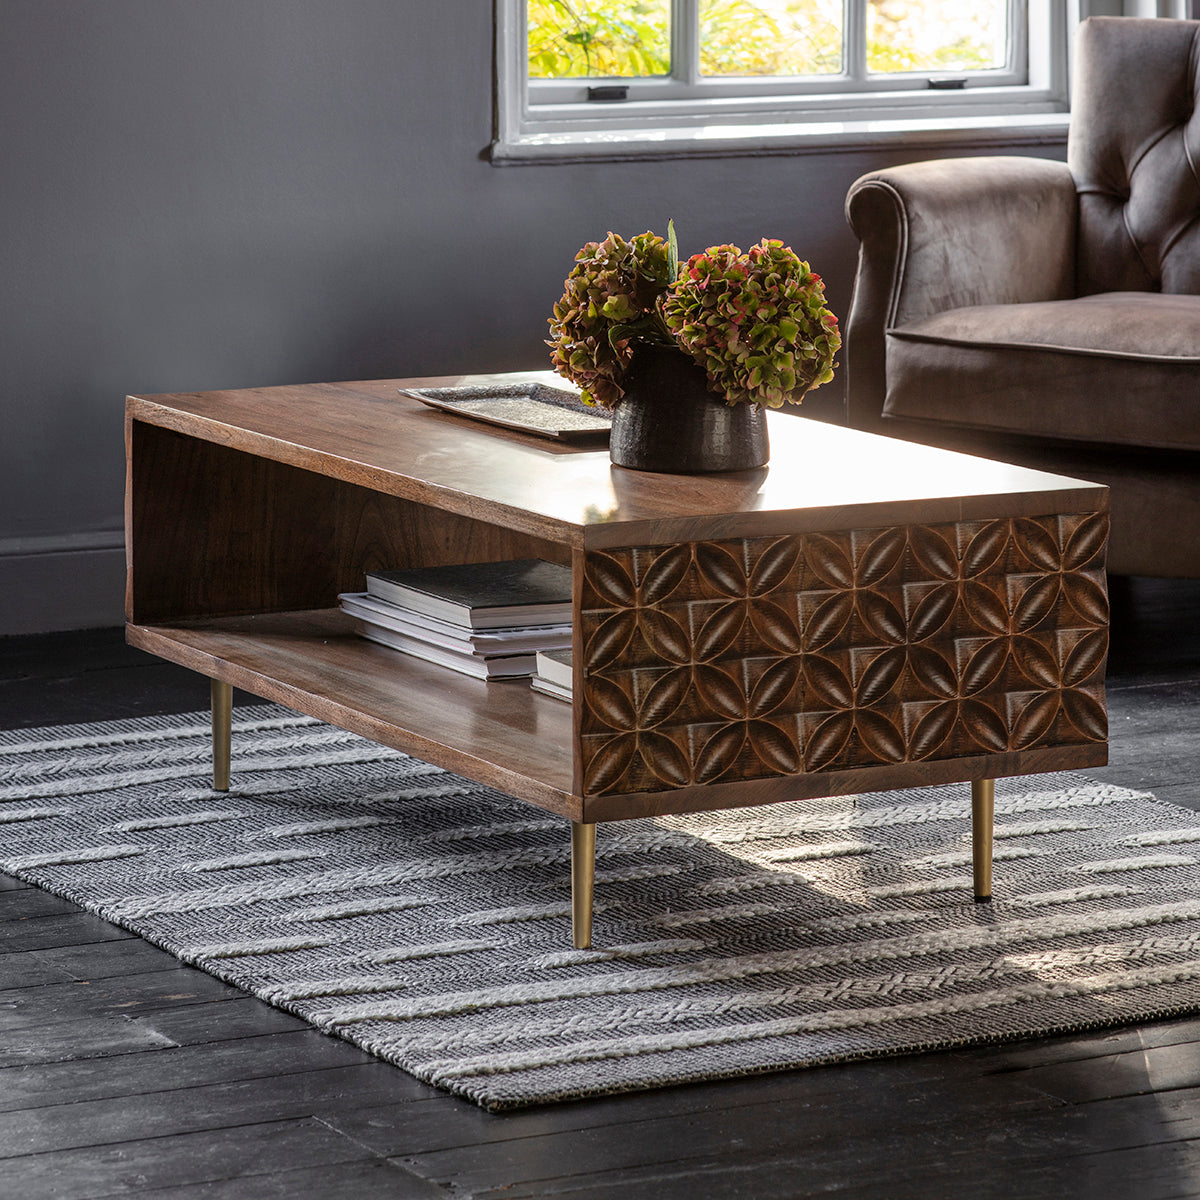 An interior decor centerpiece, the Ugborough Coffee Table by Kikiathome.co.uk adds style and functionality to a living room with a rug.